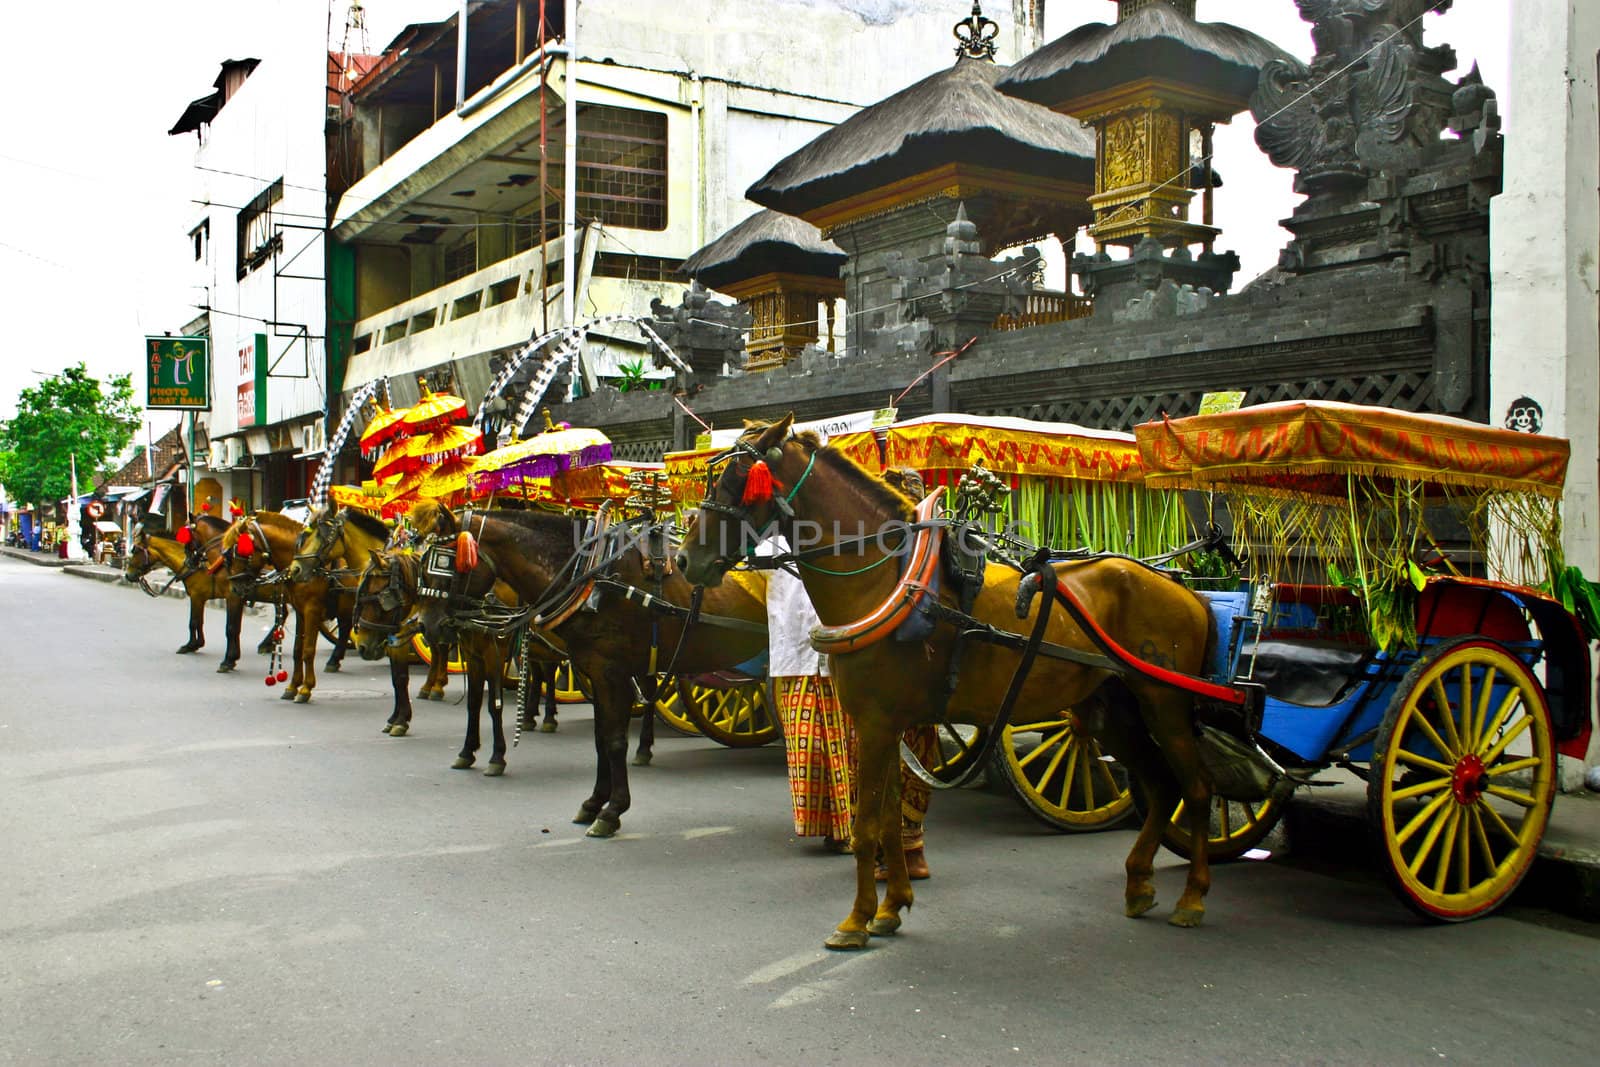 To enliven the Gajah Mada Town Festival that is carried out on December 28-30, 2008 in Denpasar, Bali, these cabriolets were decorated to attract more tourists.